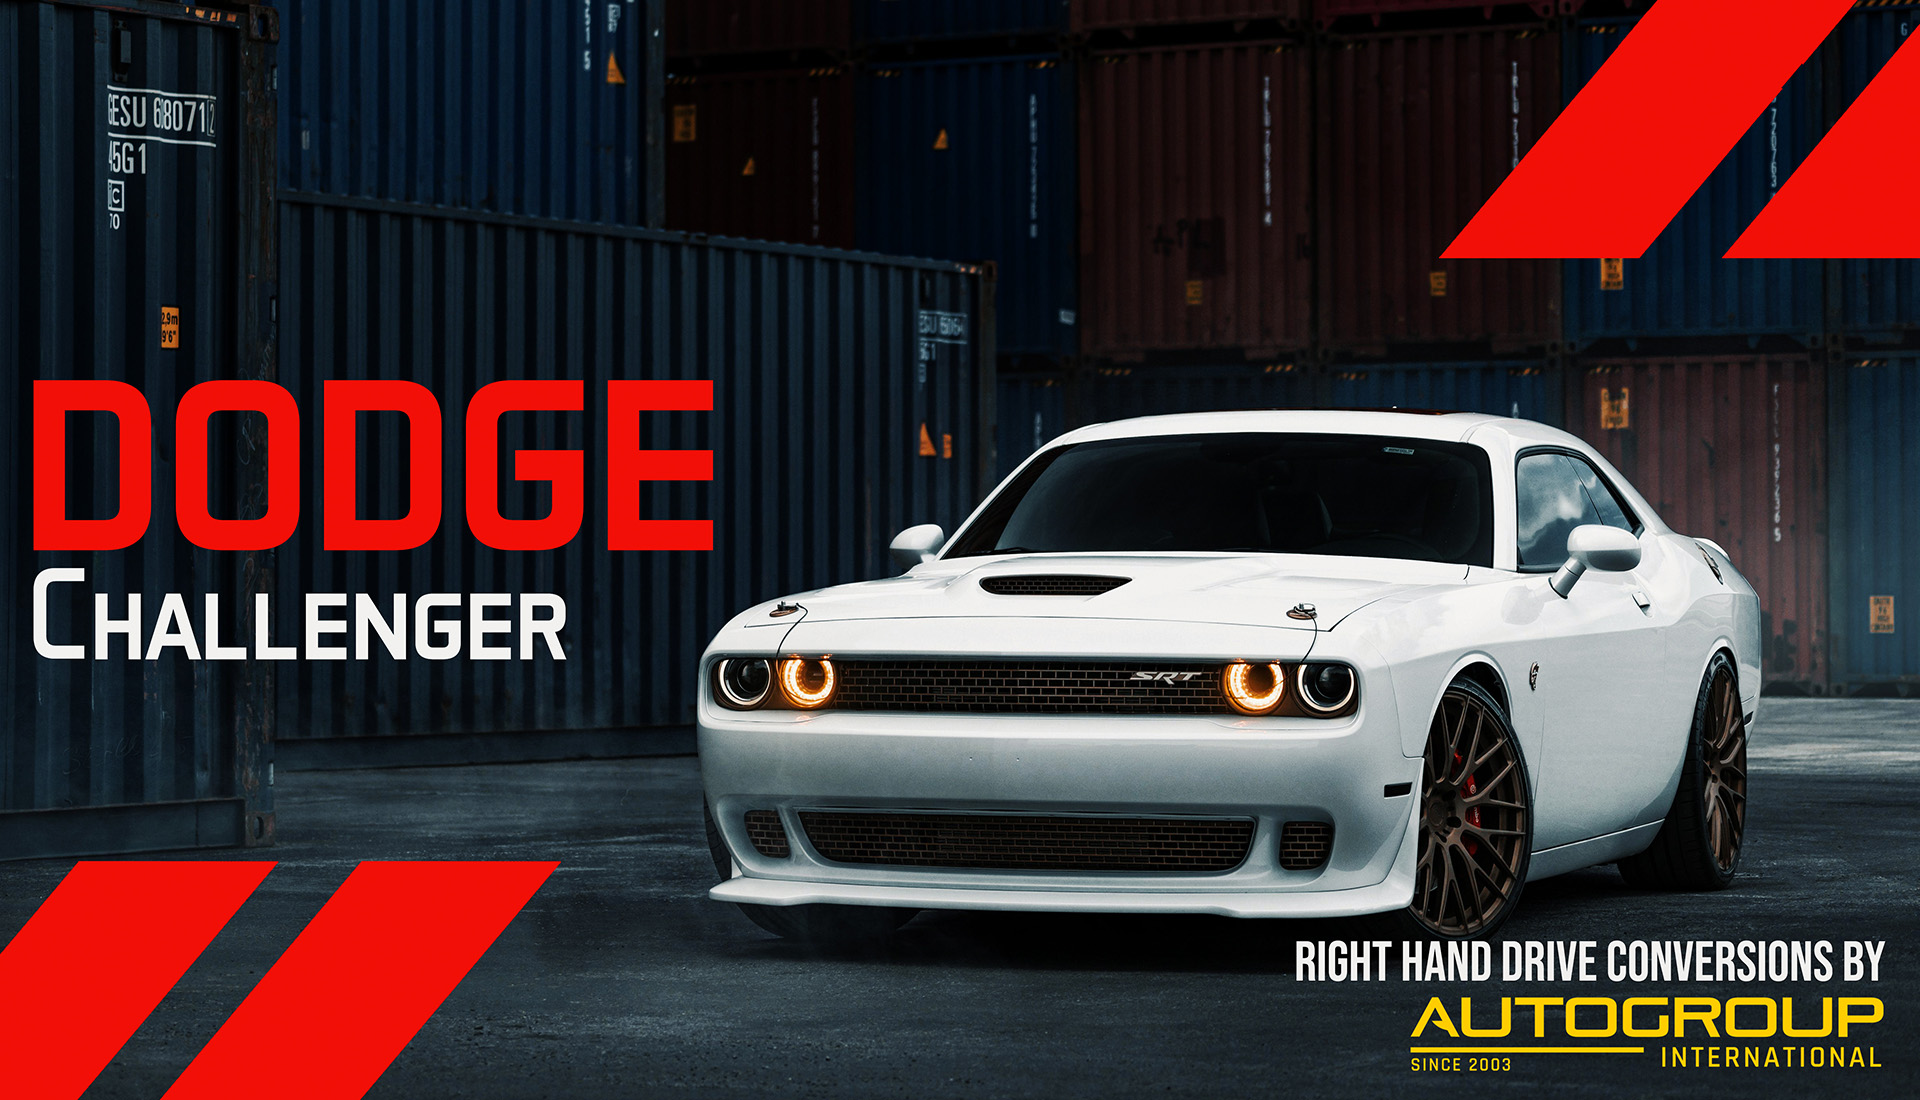 White Dodge Challenger SRT in front of shipping containers.